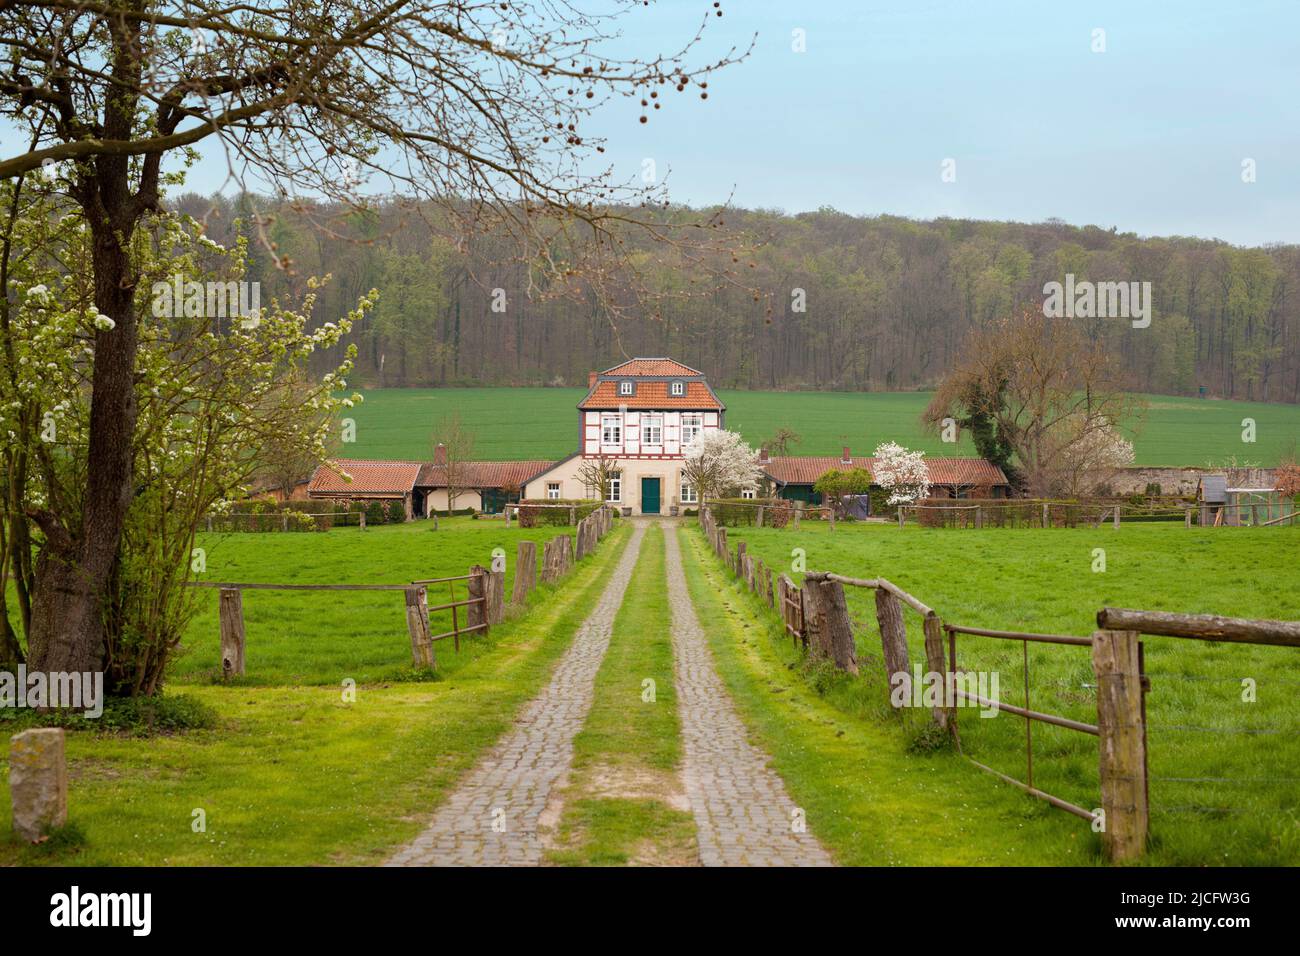 Coachman's house at Derneburg Castle, Holle municipality, Hildesheim district, Lower Saxony, Germany Stock Photo